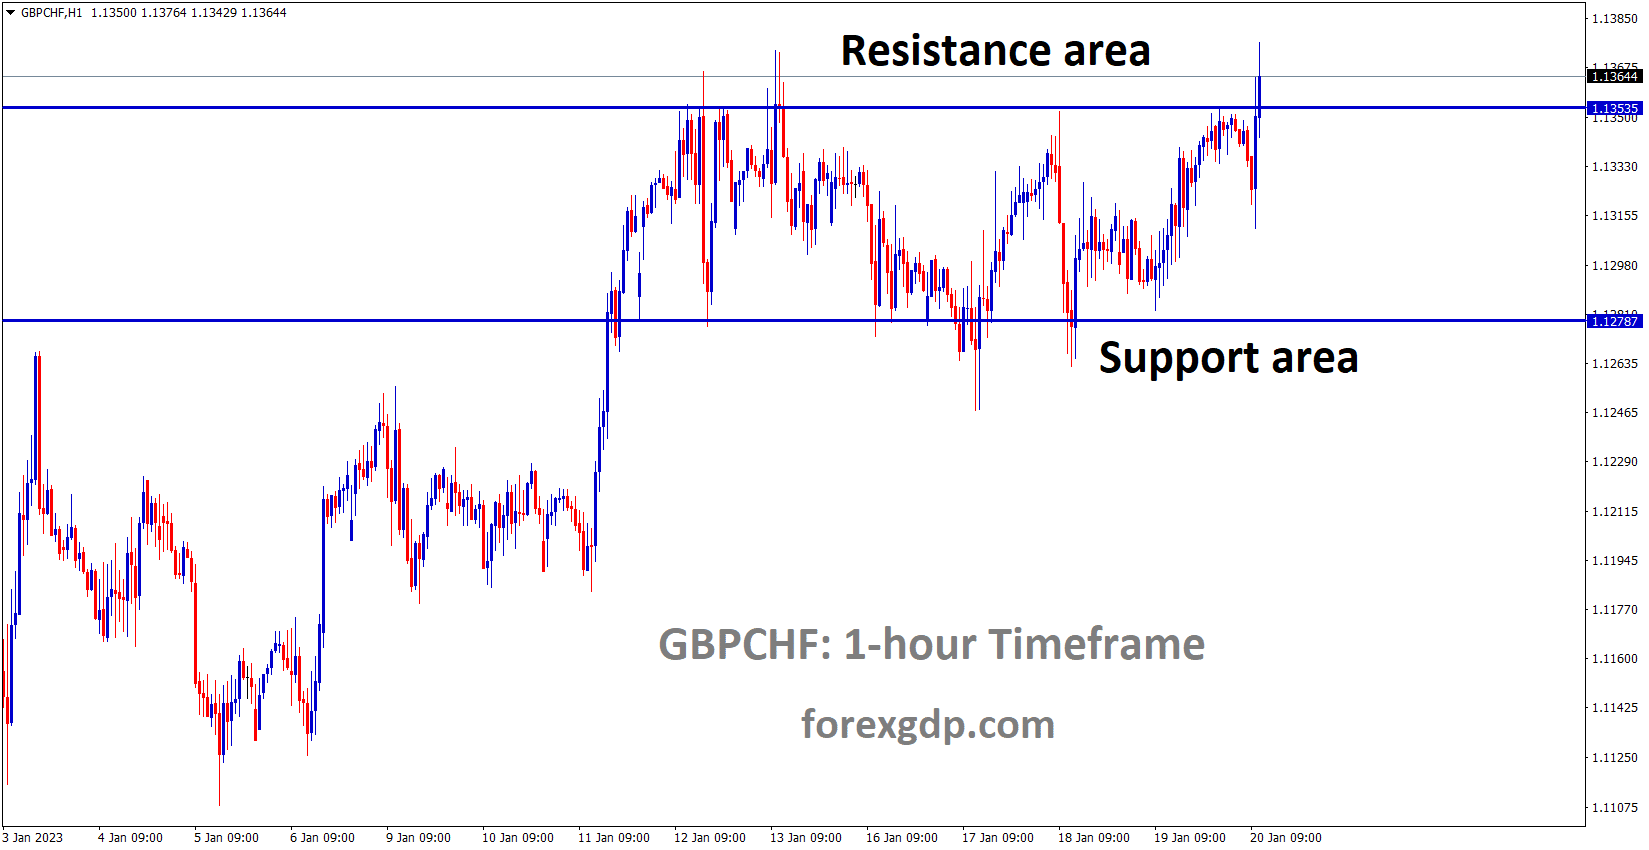 GBPCHF is moving in the Box pattern and the market has reached the horizontal resistance area of the pattern